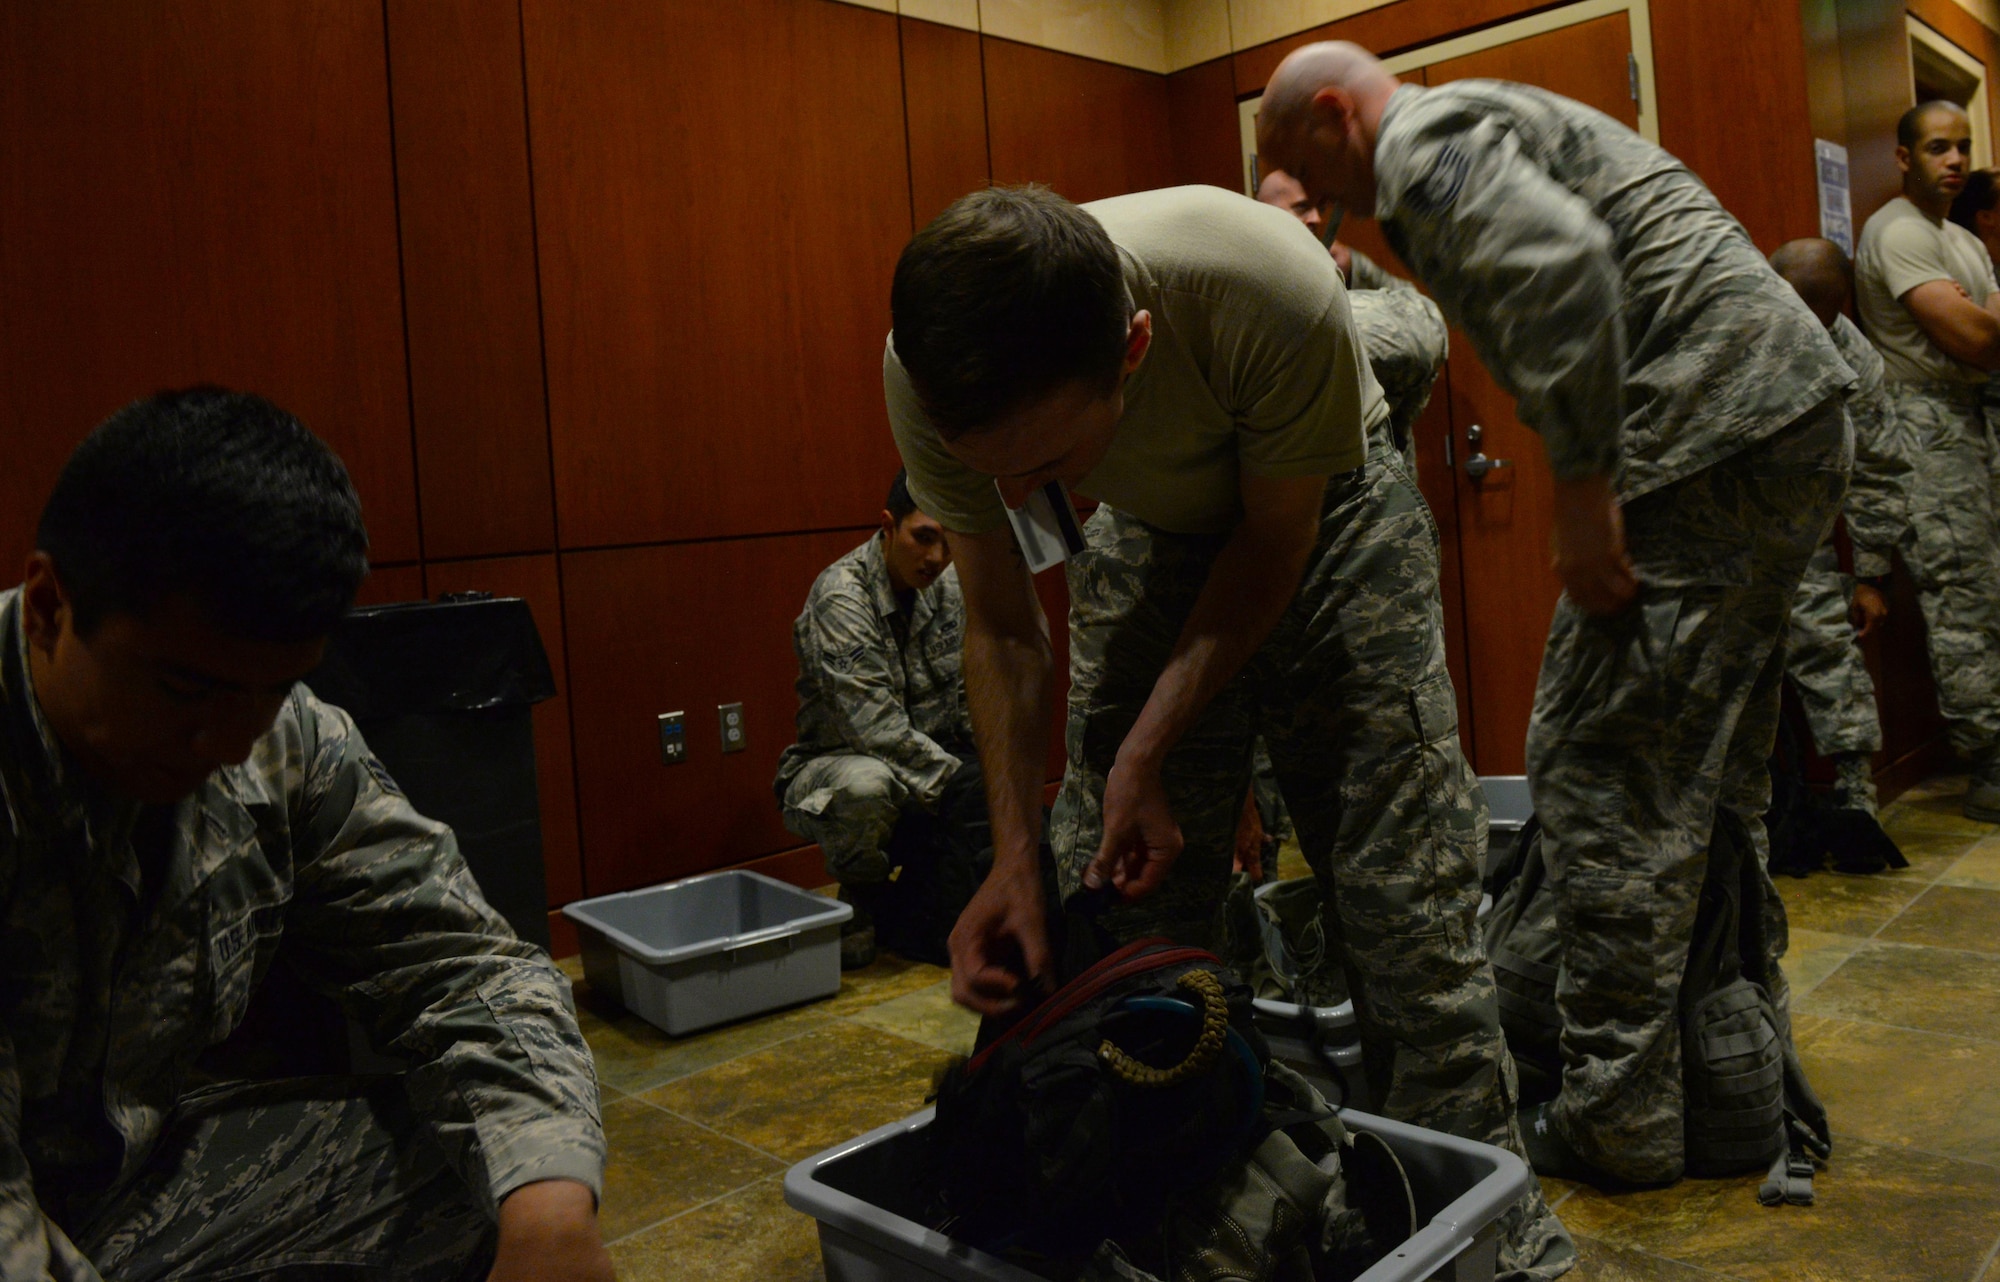 Staff Sgt. Tyler Sandberg, quality assurance assigned to the 37th Expeditionary Bomb Squadron, separates some of his carry-on luggage before processing through a sterilization room of the Deployment Center at Ellsworth Air Force Base, S.D., July 28, 2017. Ellsworth Airmen assigned to the 37th Expeditionary Bomb Squadron take the baton from the 9th Expeditionary Bomb Squadron, Dyess Air Force Base, Texas, for ongoing Continuous Bomb Presence missions occurring in U.S. Pacific Command. (U.S. Air Force photo by Airman Nicolas Z. Erwin)